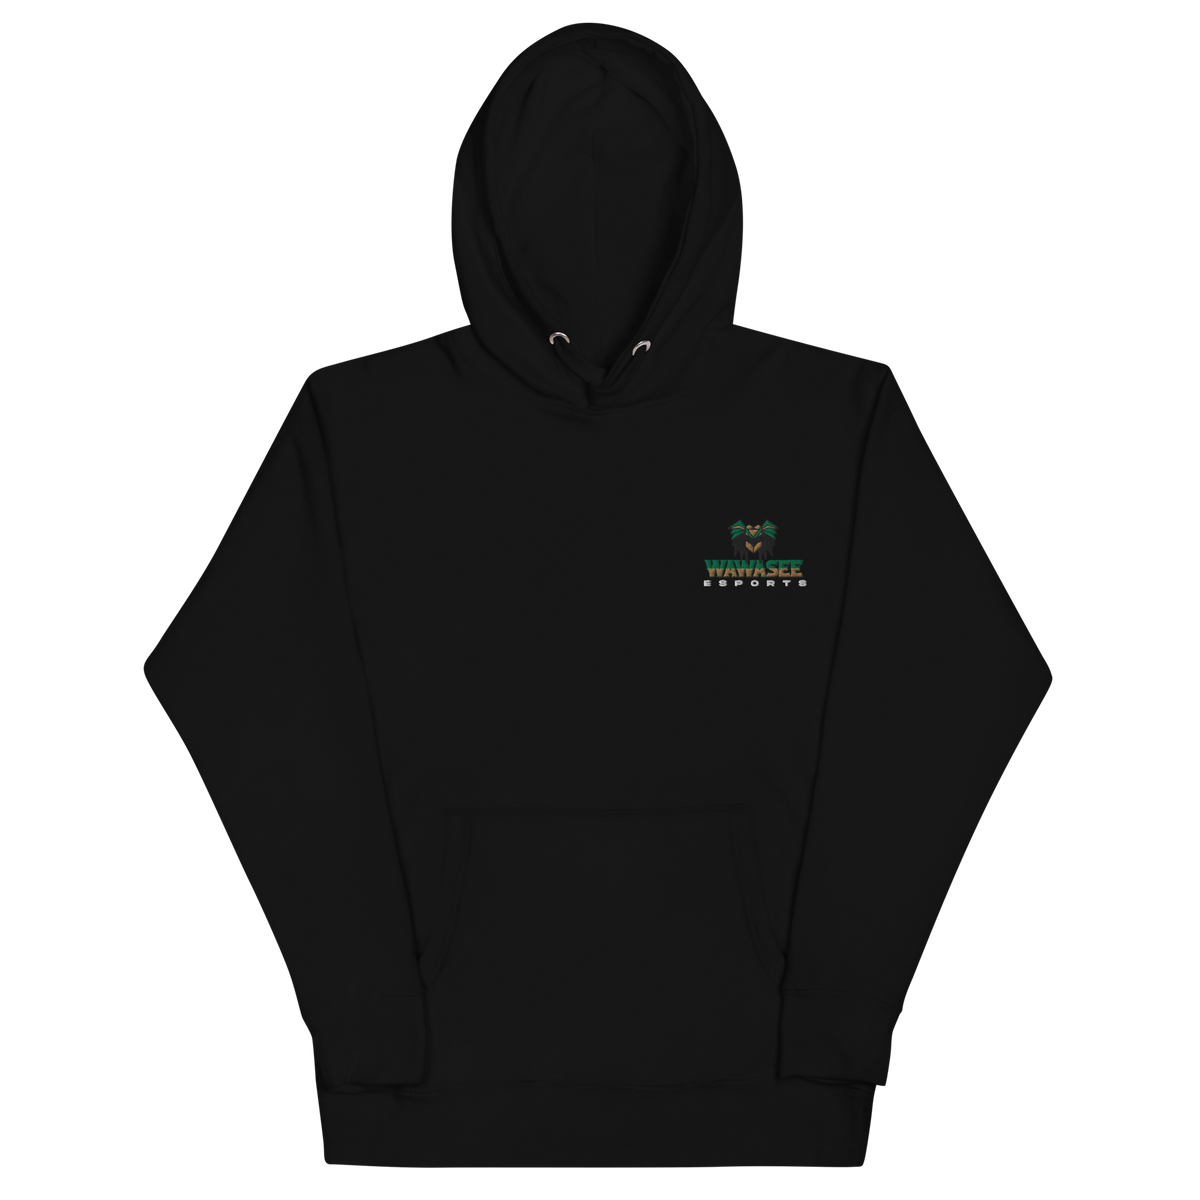 Wawasee High School | On Demand | Embroidered Unisex Hoodie